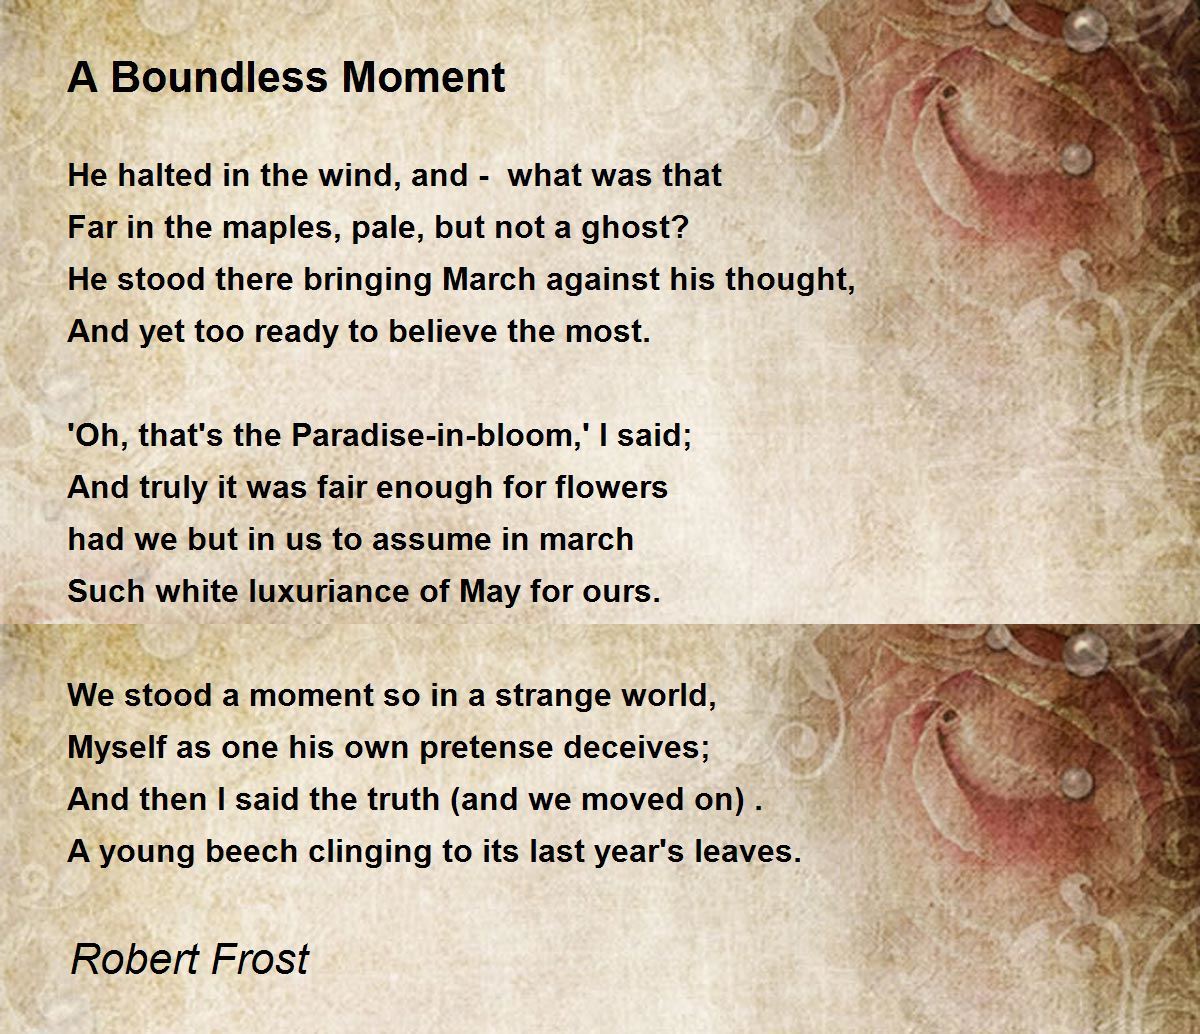 A Boundless Moment Poem by Robert Frost - Poem Hunter Comments